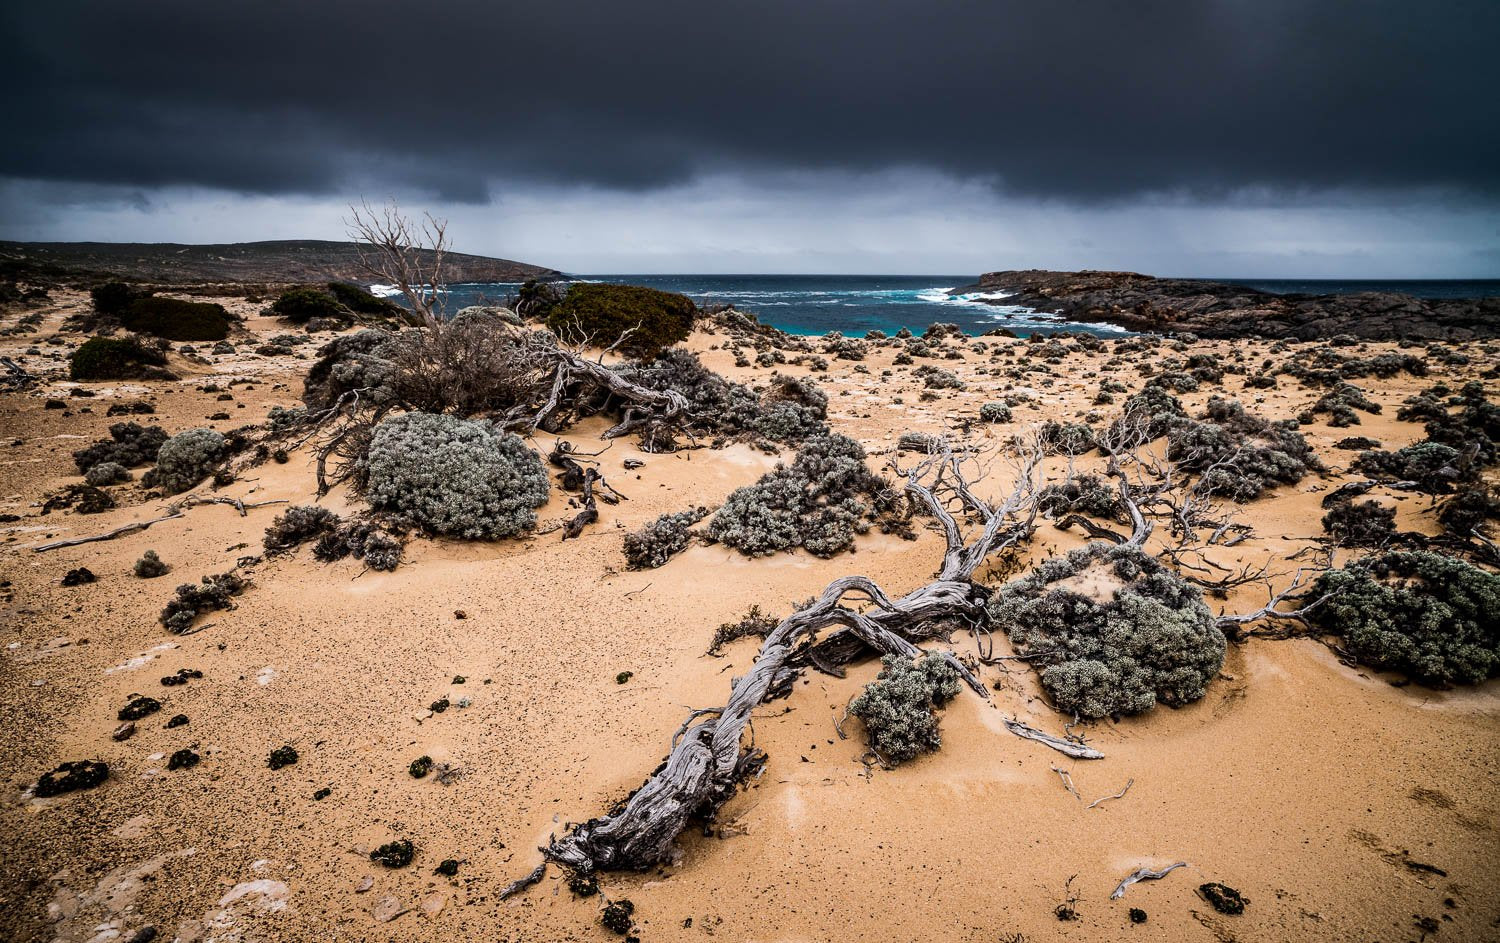 A beach with a lot of weird stones and wooden bushes, and stormy clouds over the sea, Storm over Whalers Way, Eyre Peninsula